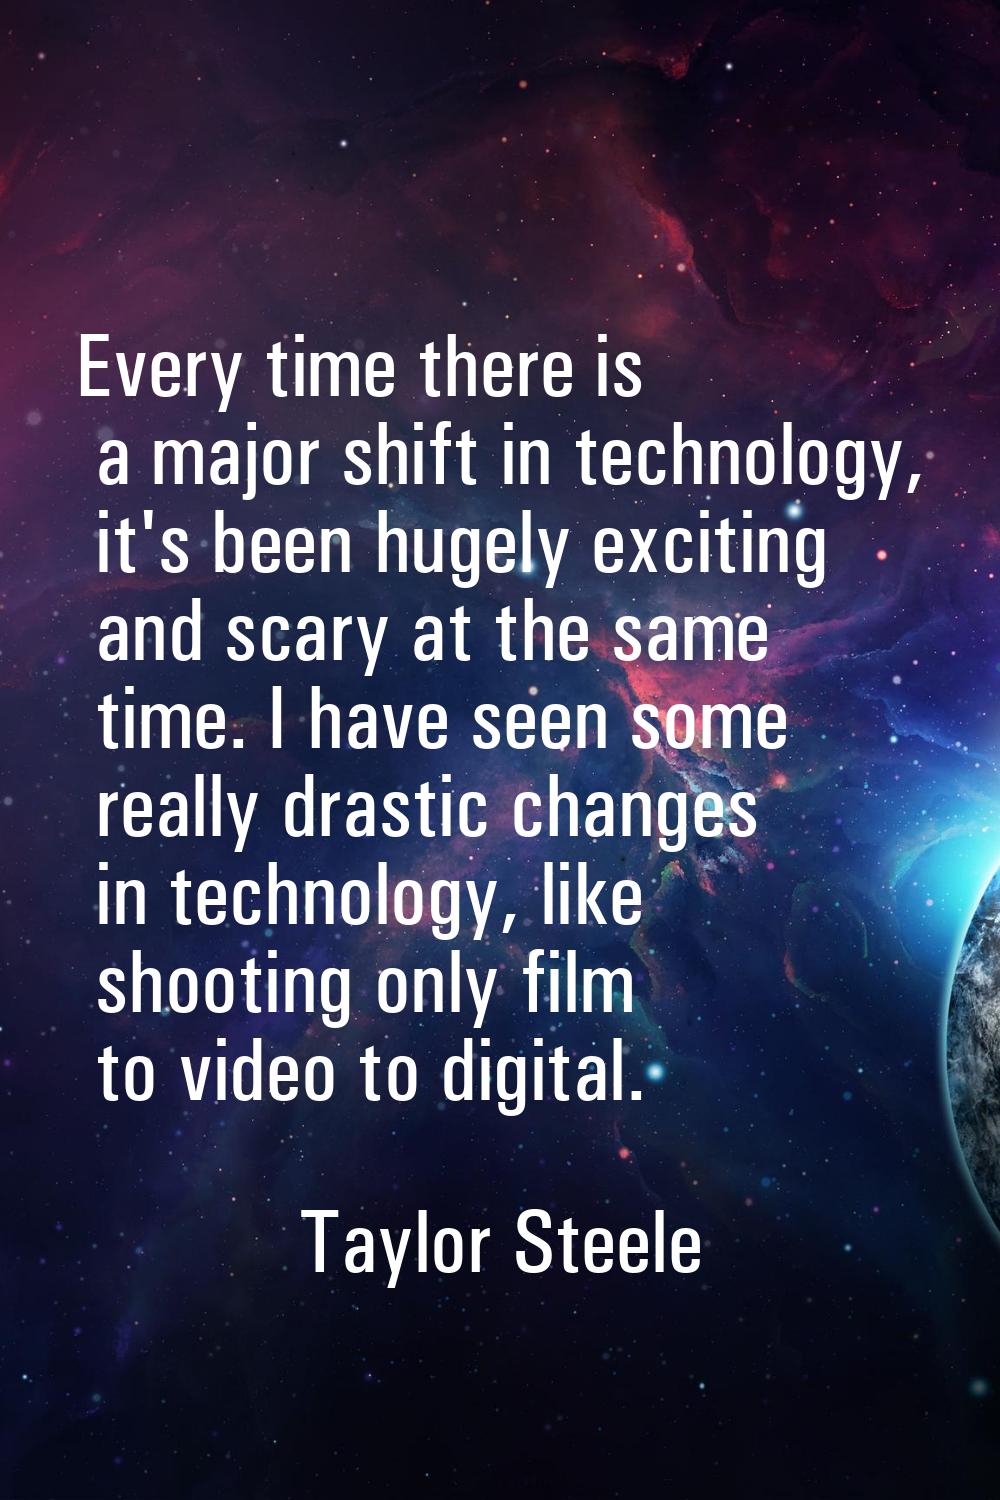 Every time there is a major shift in technology, it's been hugely exciting and scary at the same ti